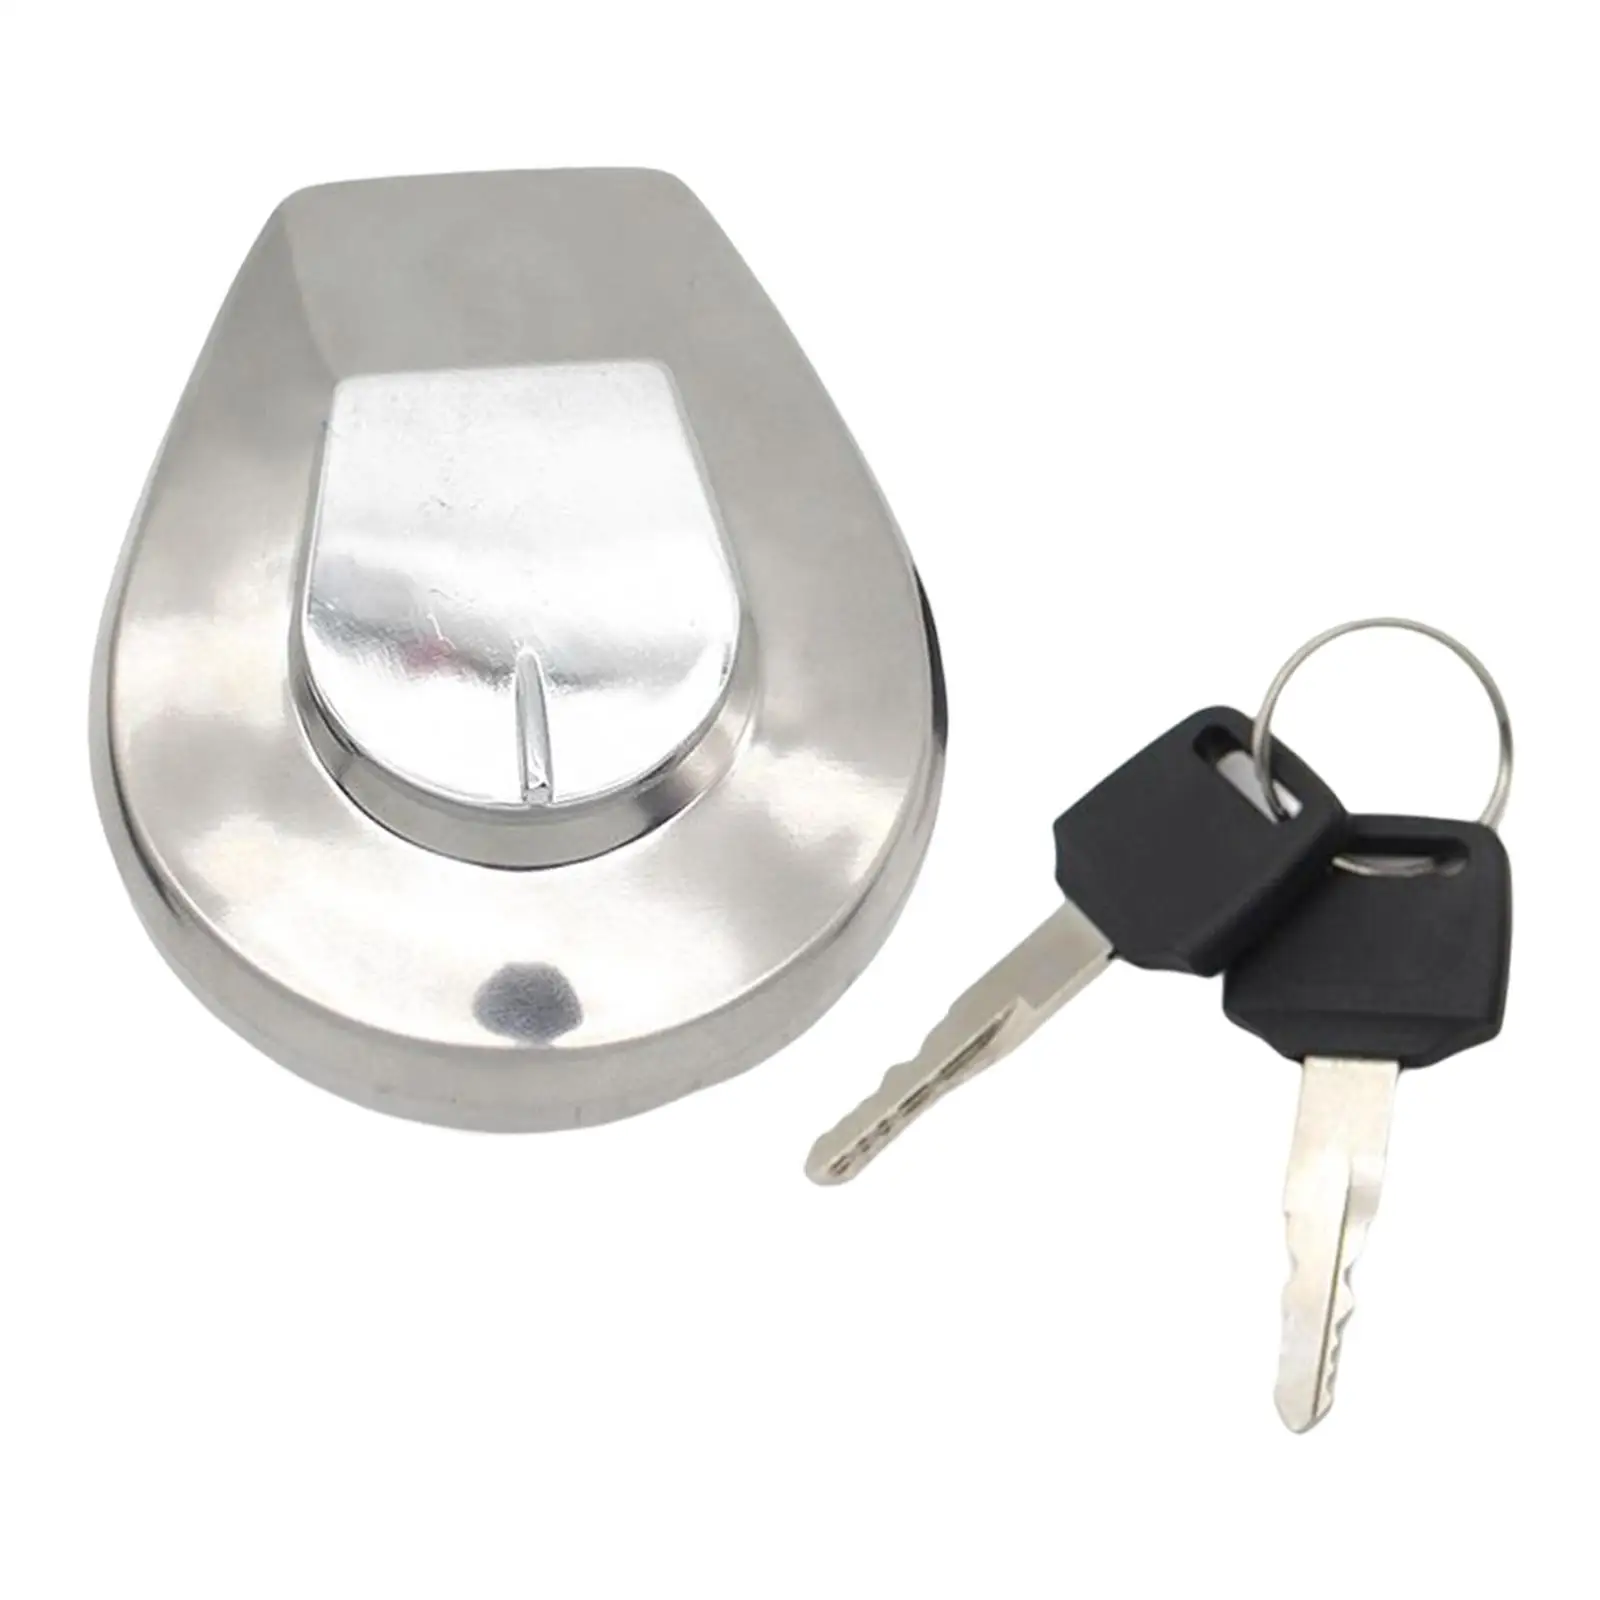 Motorcycle Oil Fuel Tank Gas Cap Cover with 2 Keys for  Vf750C CB550SC GL1500C VT700C CX650C